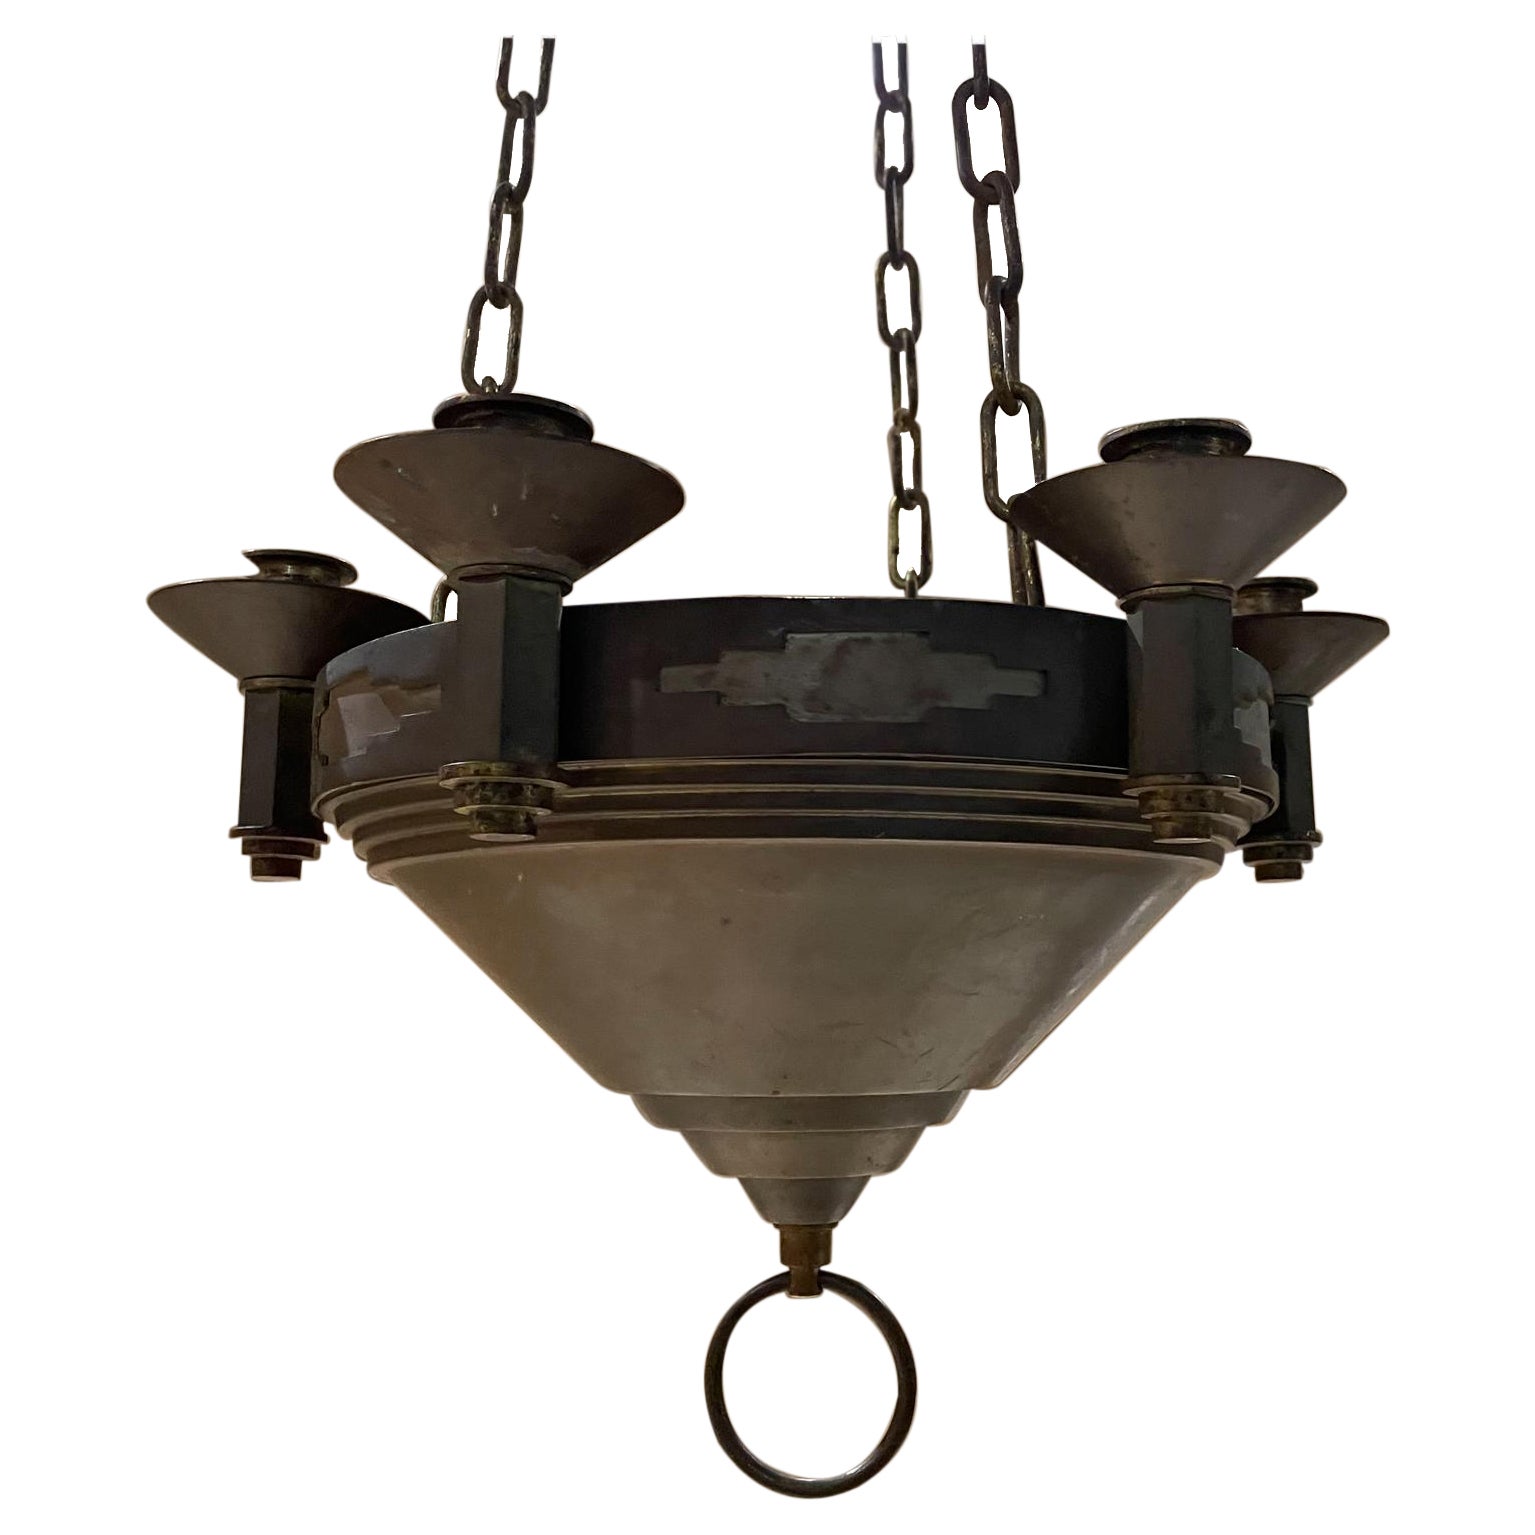 Striking Art Deco six candle holder modern hanging chandelier pendant
Unsigned
33 x 12 diameter inches
Preowned original unrestored vintage condition.
Refer to images.


 